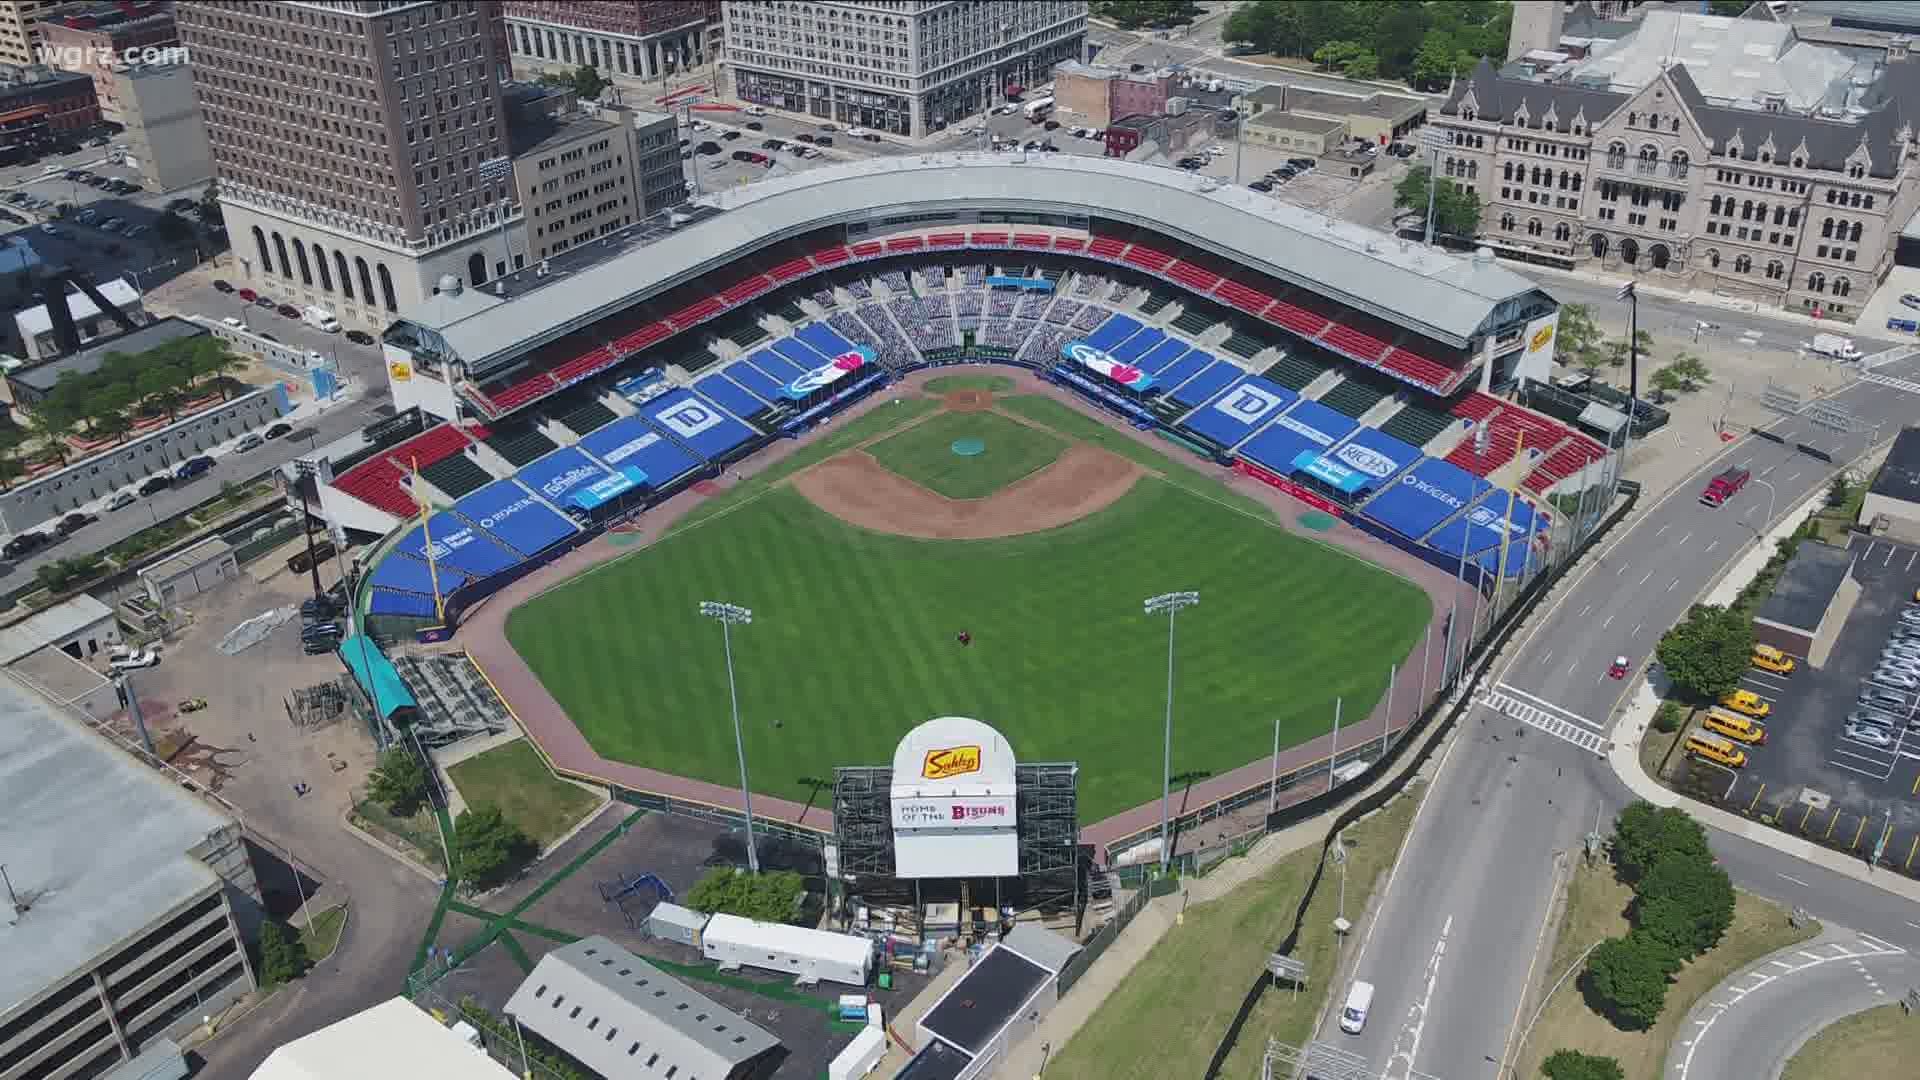 We are under an hour away from buffalo's first MLB game in more than 100 years with the Blue Jays playing their first home game at Sahlen Field.